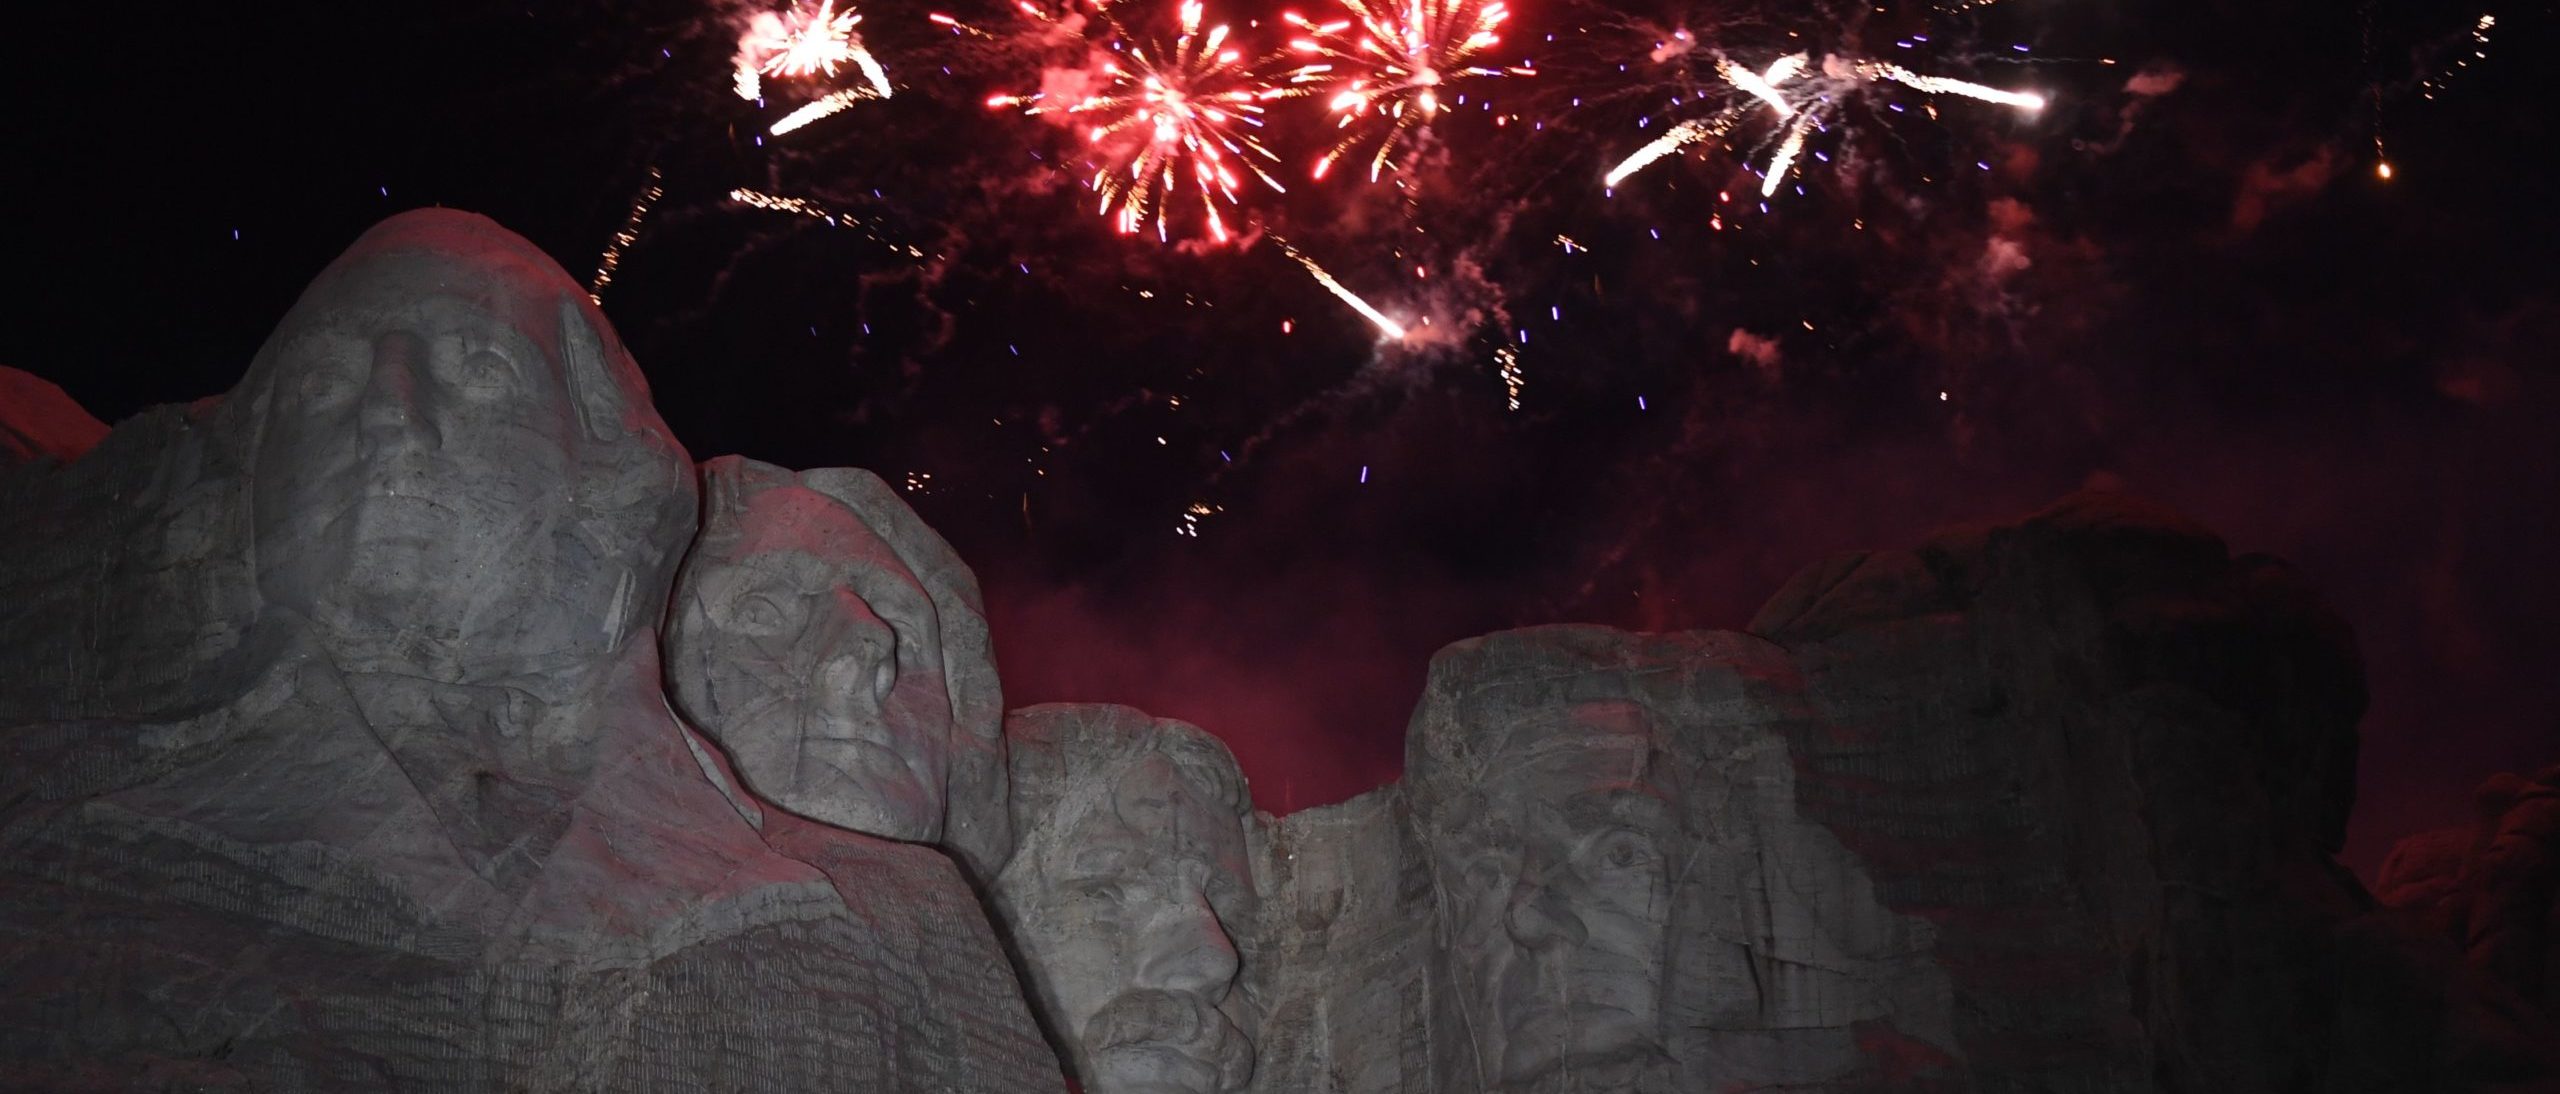 Fireworks explode above the Mount Rushmore National Monument during an Independence Day event attended by the US president in Keystone, Fireworks explode above the Mount Rushmore National Monument during an Independence Day event attended by the US president in Keystone, South Dakota, July 3, 2020. (Photo by SAUL LOEB / AFP) (Photo by SAUL LOEB/AFP via Getty Images) Dakota, July 3, 2020. (Photo by SAUL LOEB / AFP) (Photo by SAUL LOEB/AFP via Getty Images)